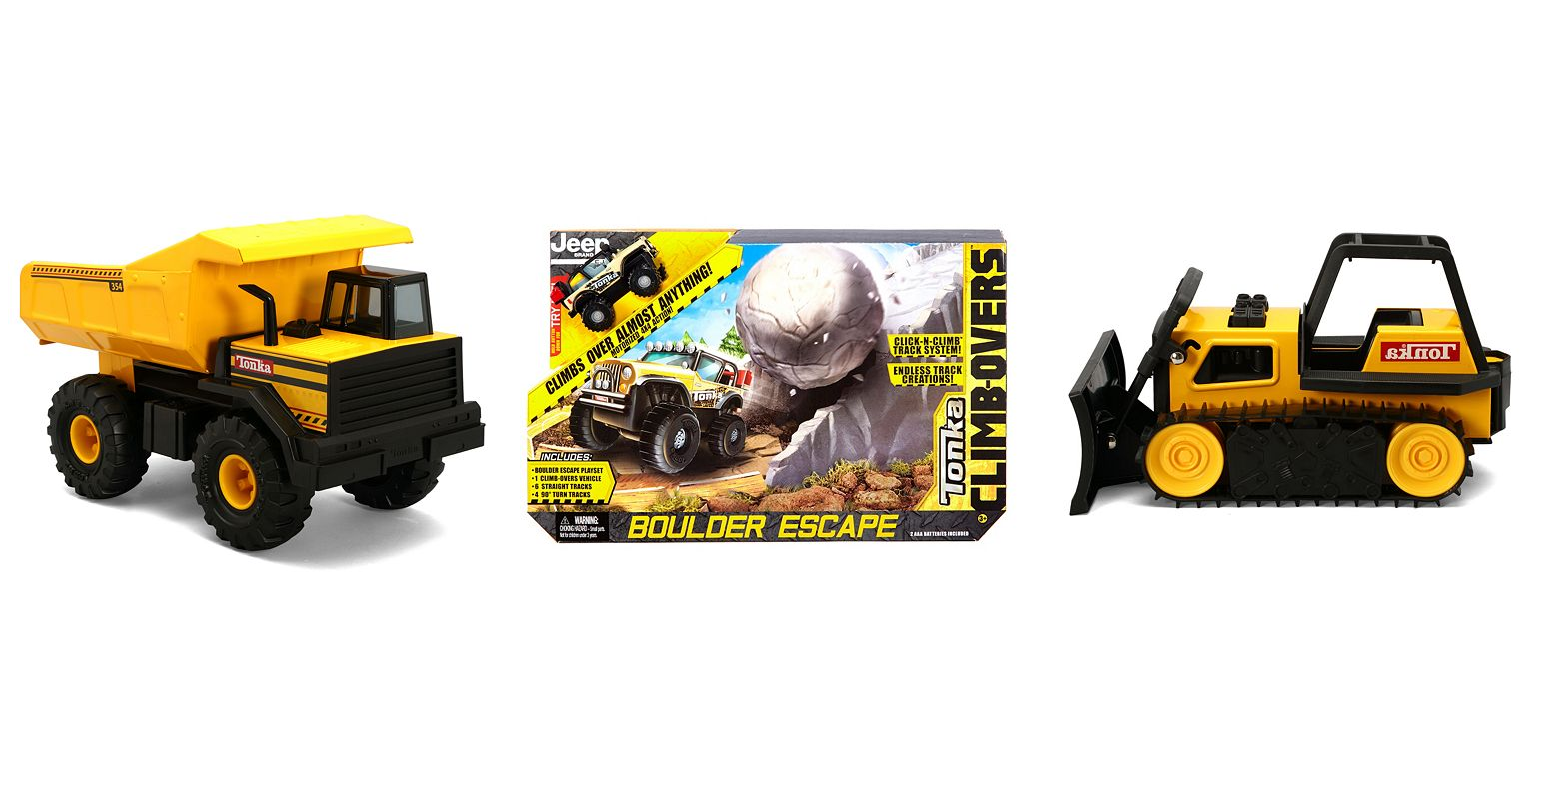 Kohl’s: Save 20% Off Select Toys + Save an Additional 25% Off! Hot Deals On Tonka Toys!